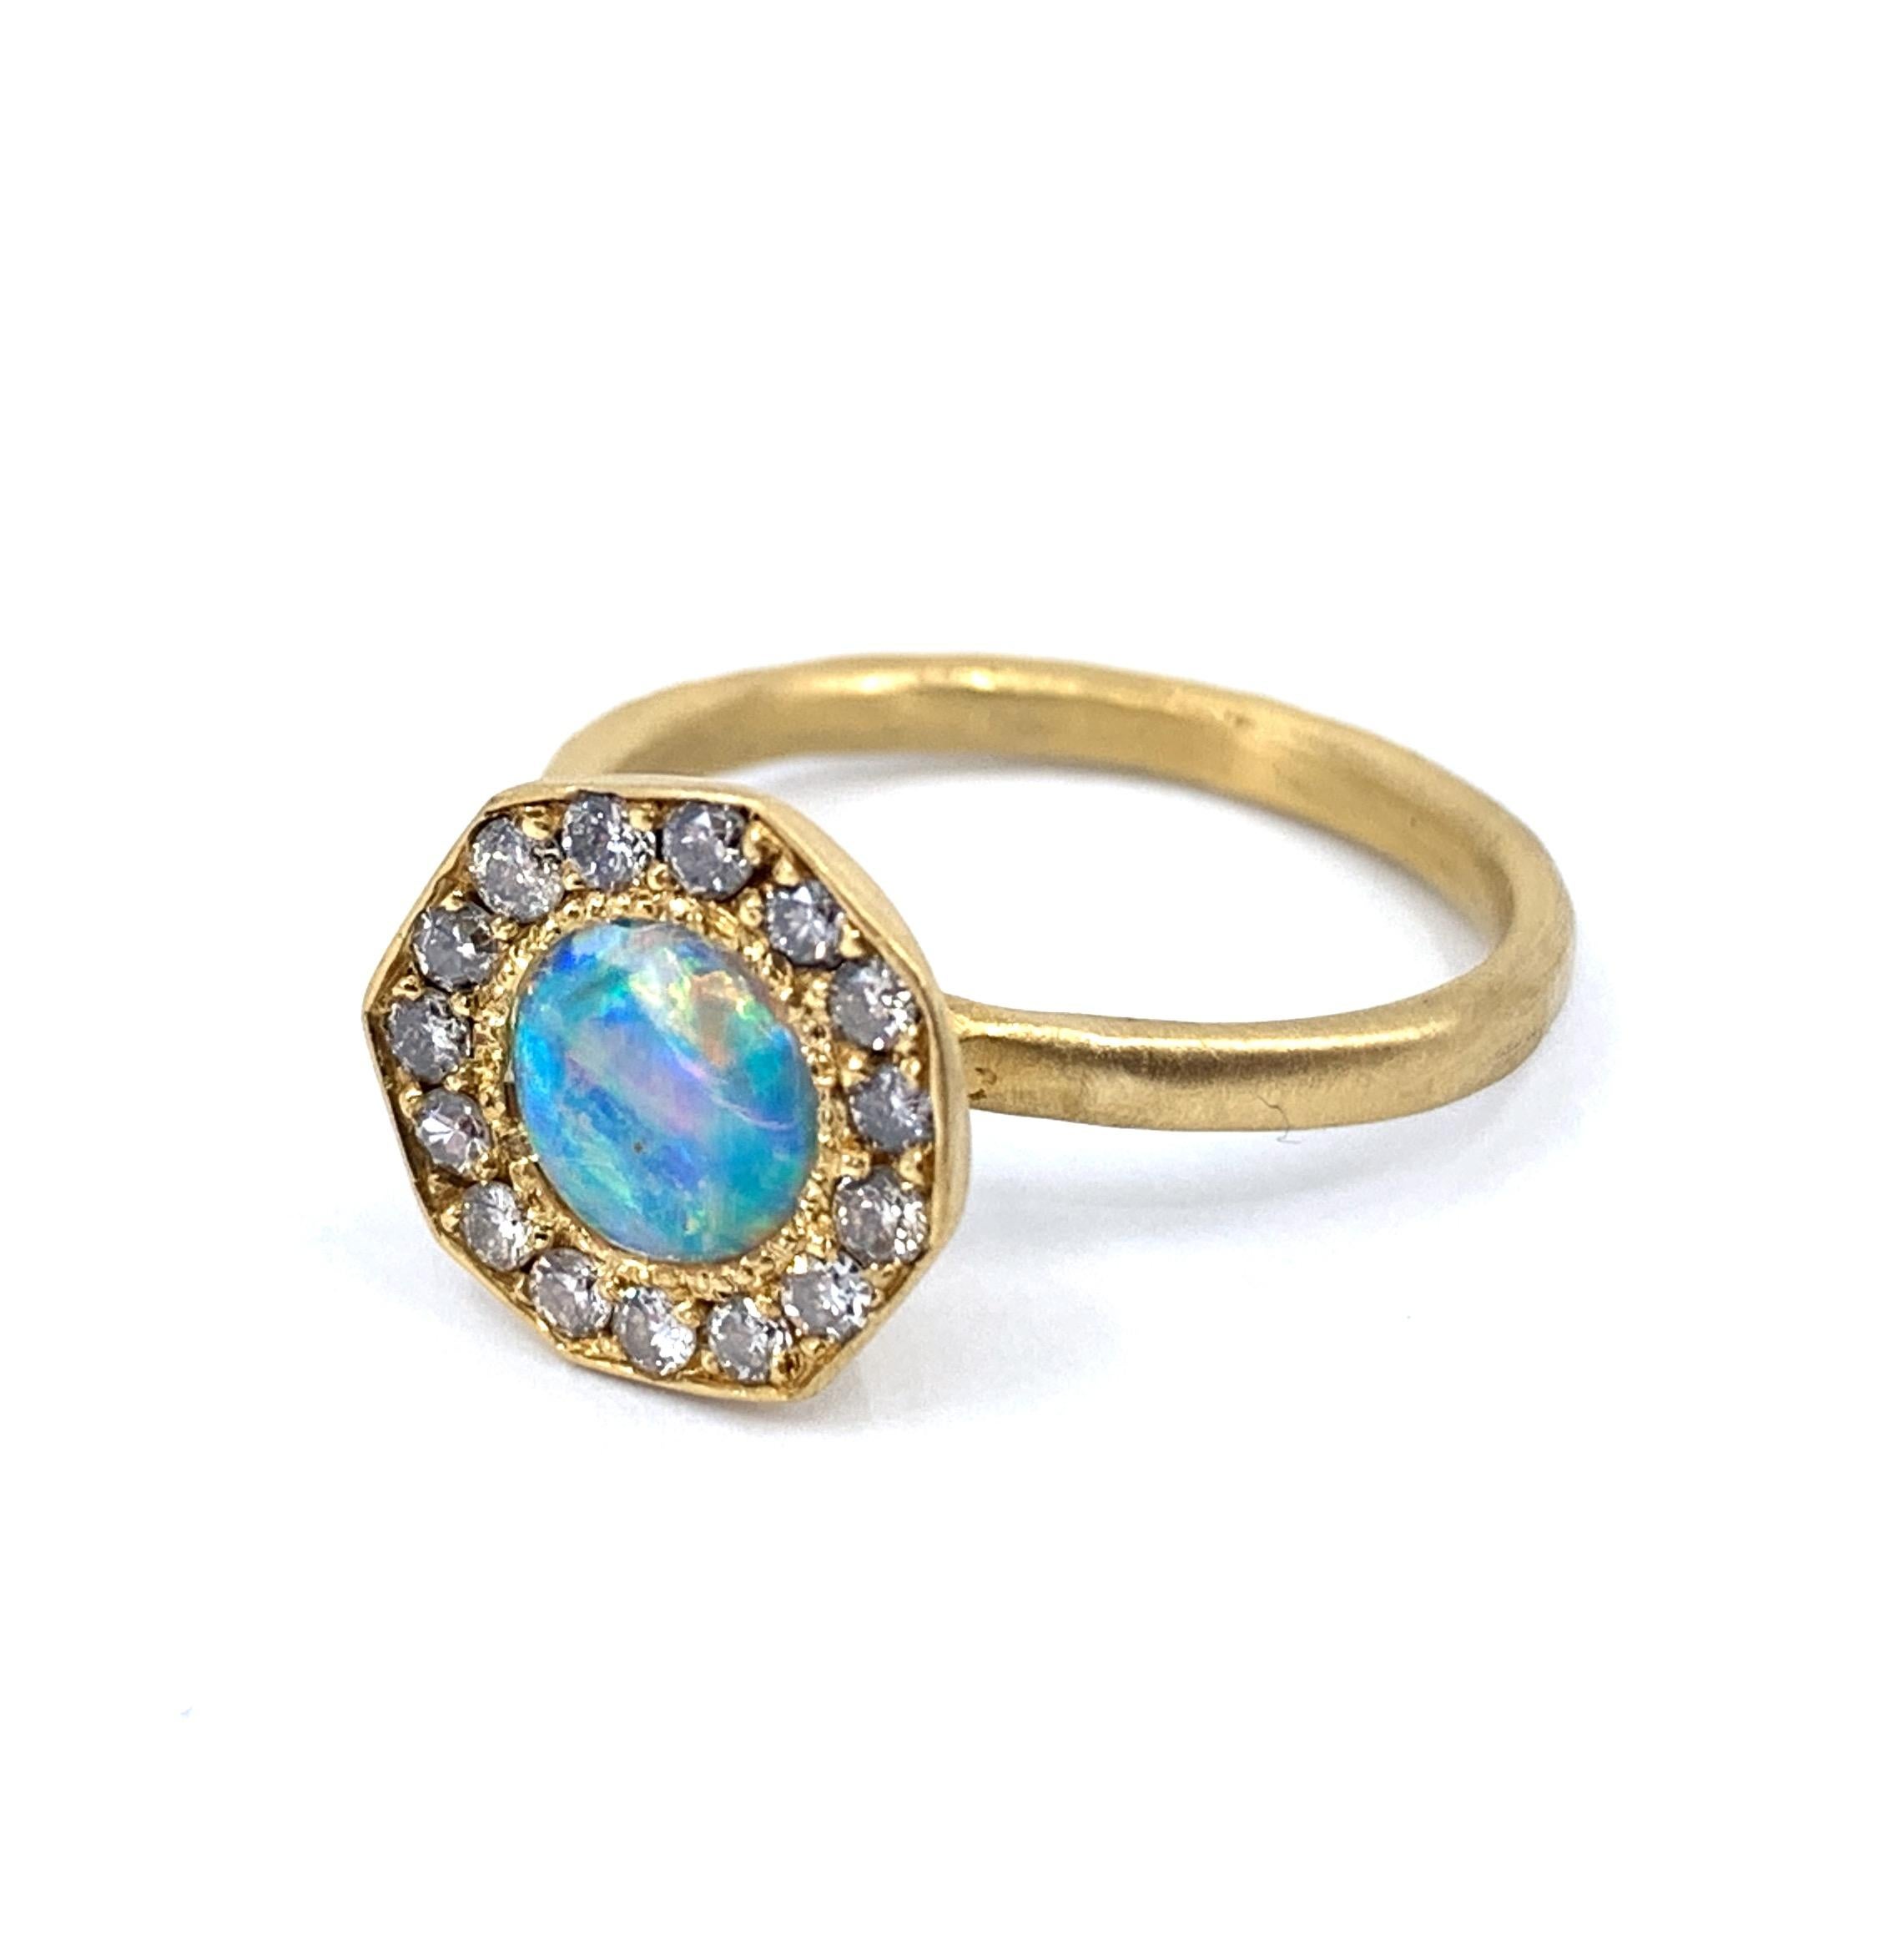 Eytan Brandes made this appealing little ring to show off a particularly fiery Australian opal.  The stone is only about 6mm in diameter -- estimated at 0.30 carats -- but is bursting with life and color.  Surrounding it are 15 bright, good-quality